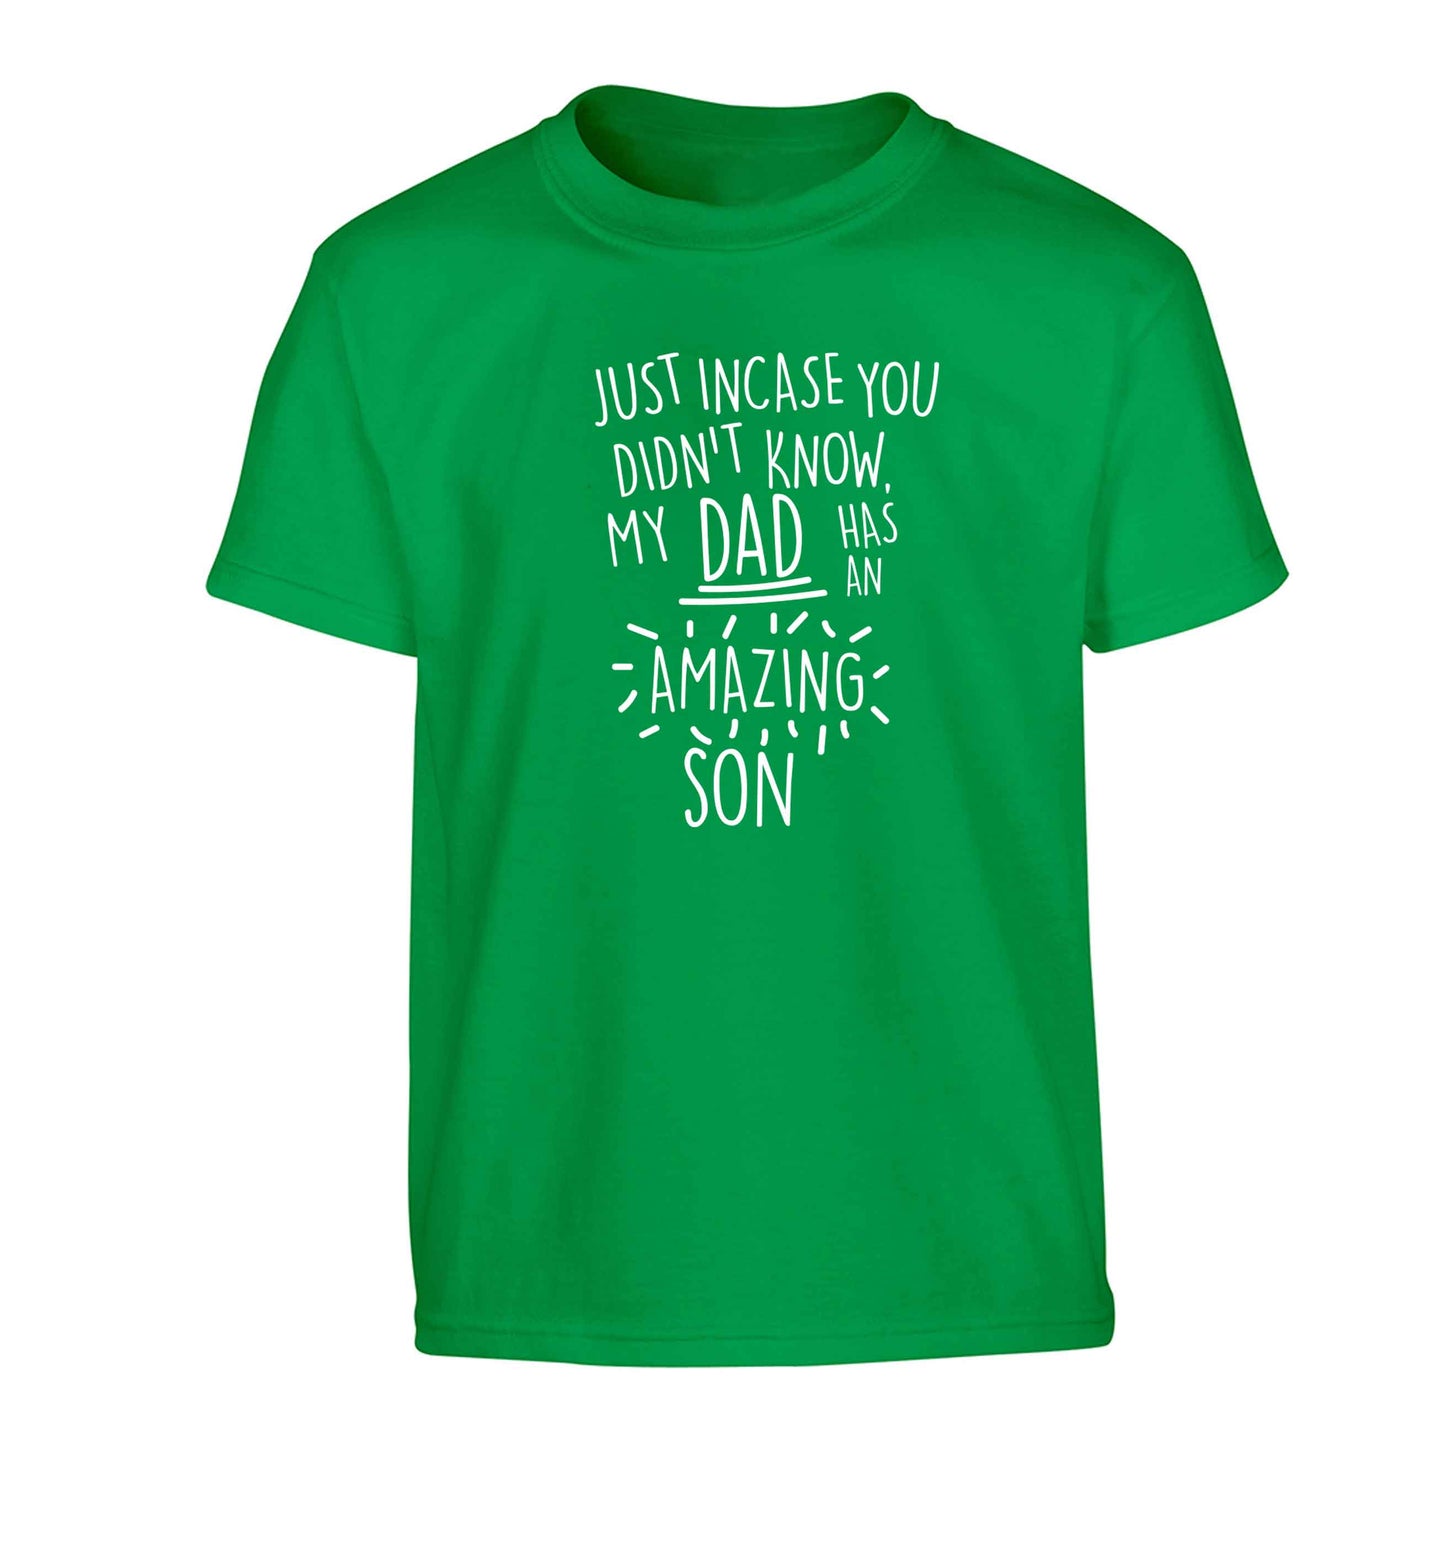 Just incase you didn't know my dad has an amazing son Children's green Tshirt 12-13 Years